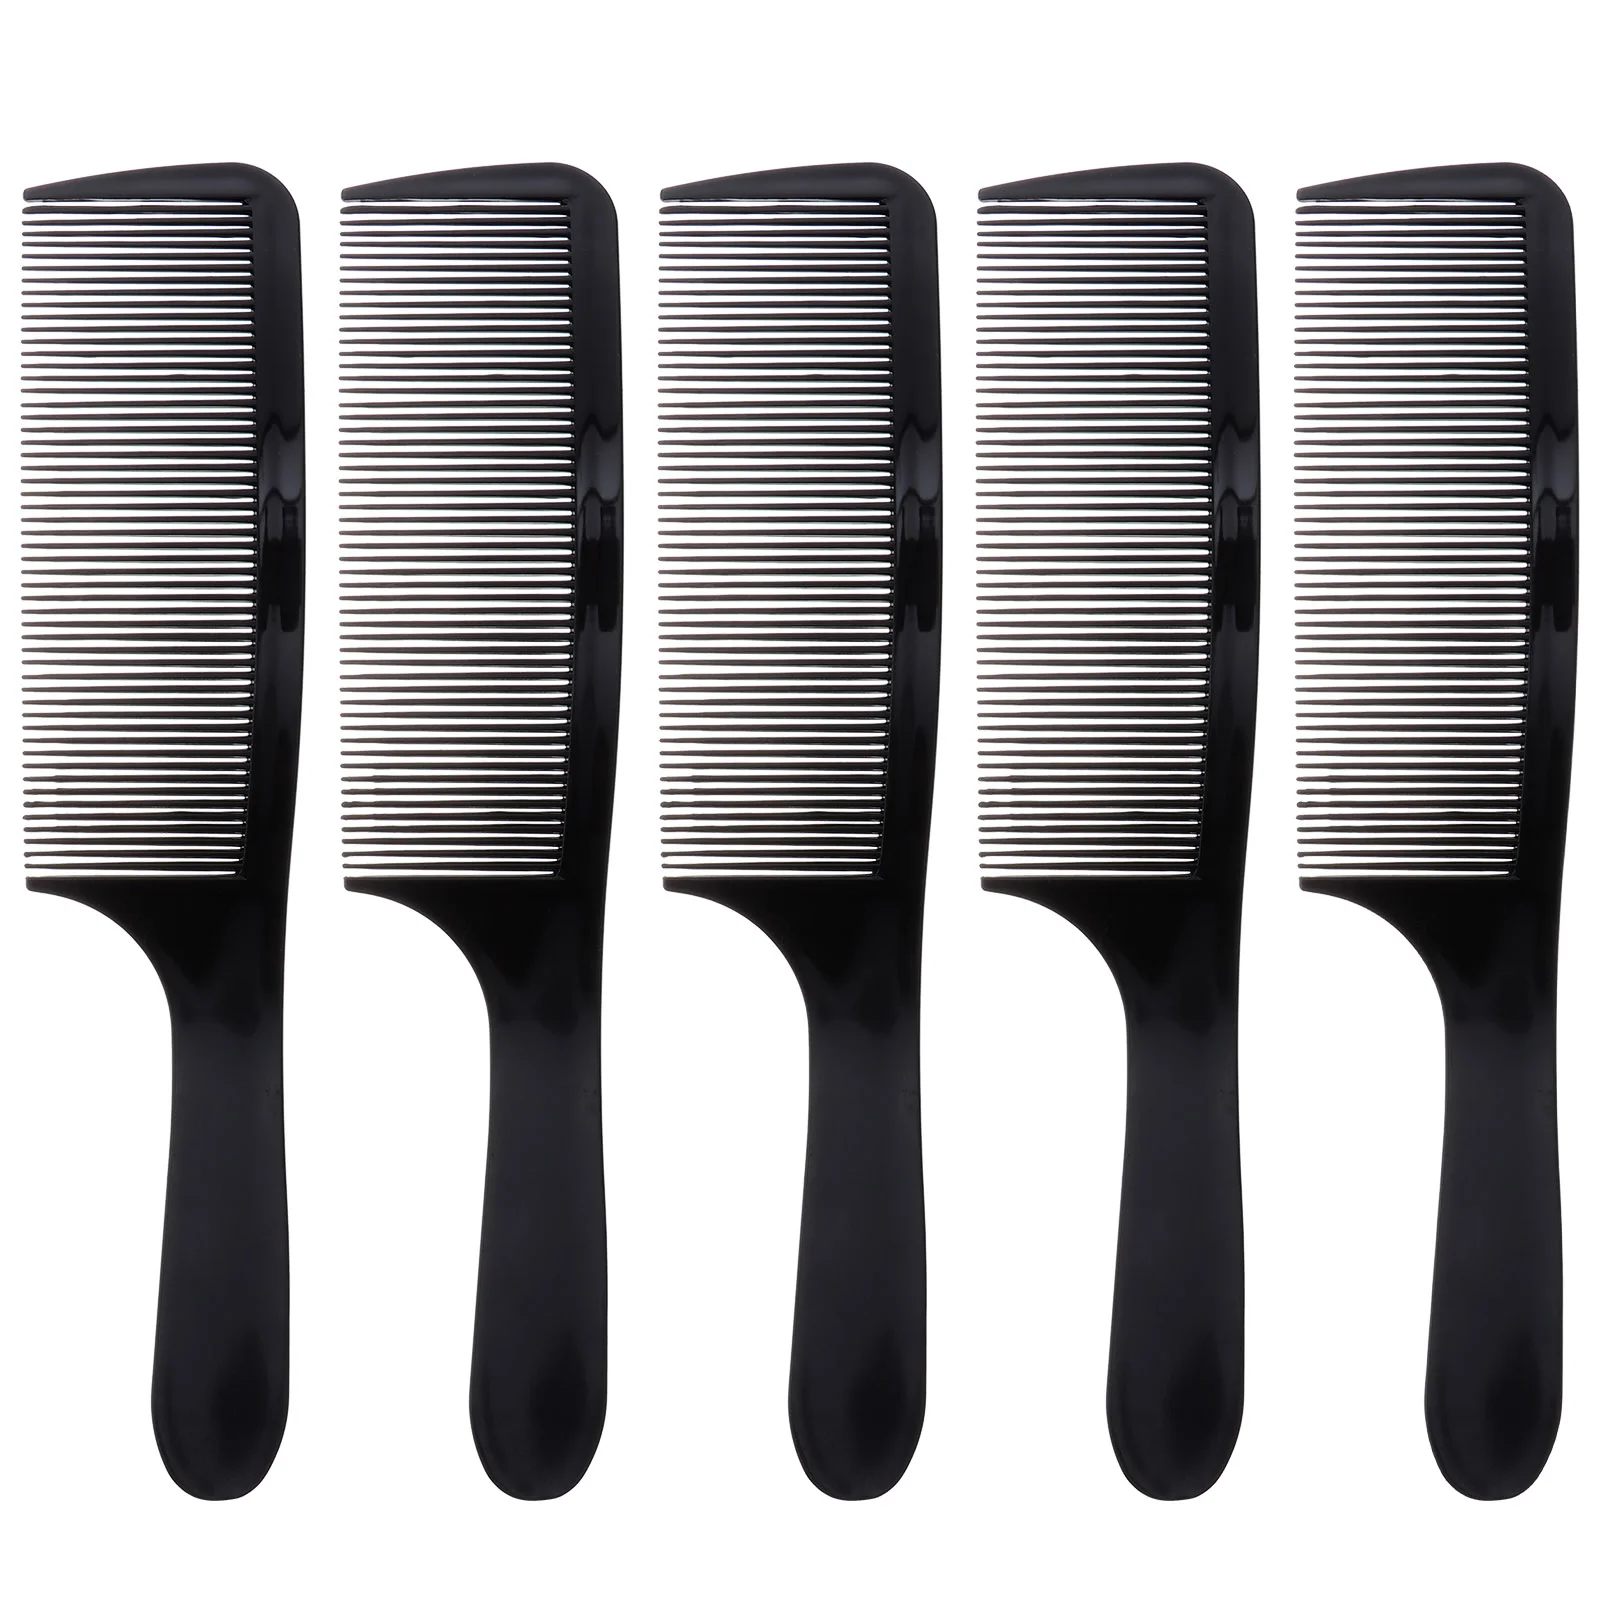 

Comb Hair Barber Combs Cutting Clipper Hairdressing Brush Tooth Supplies Flat Blending Styling Portable Haircut Shop Travel